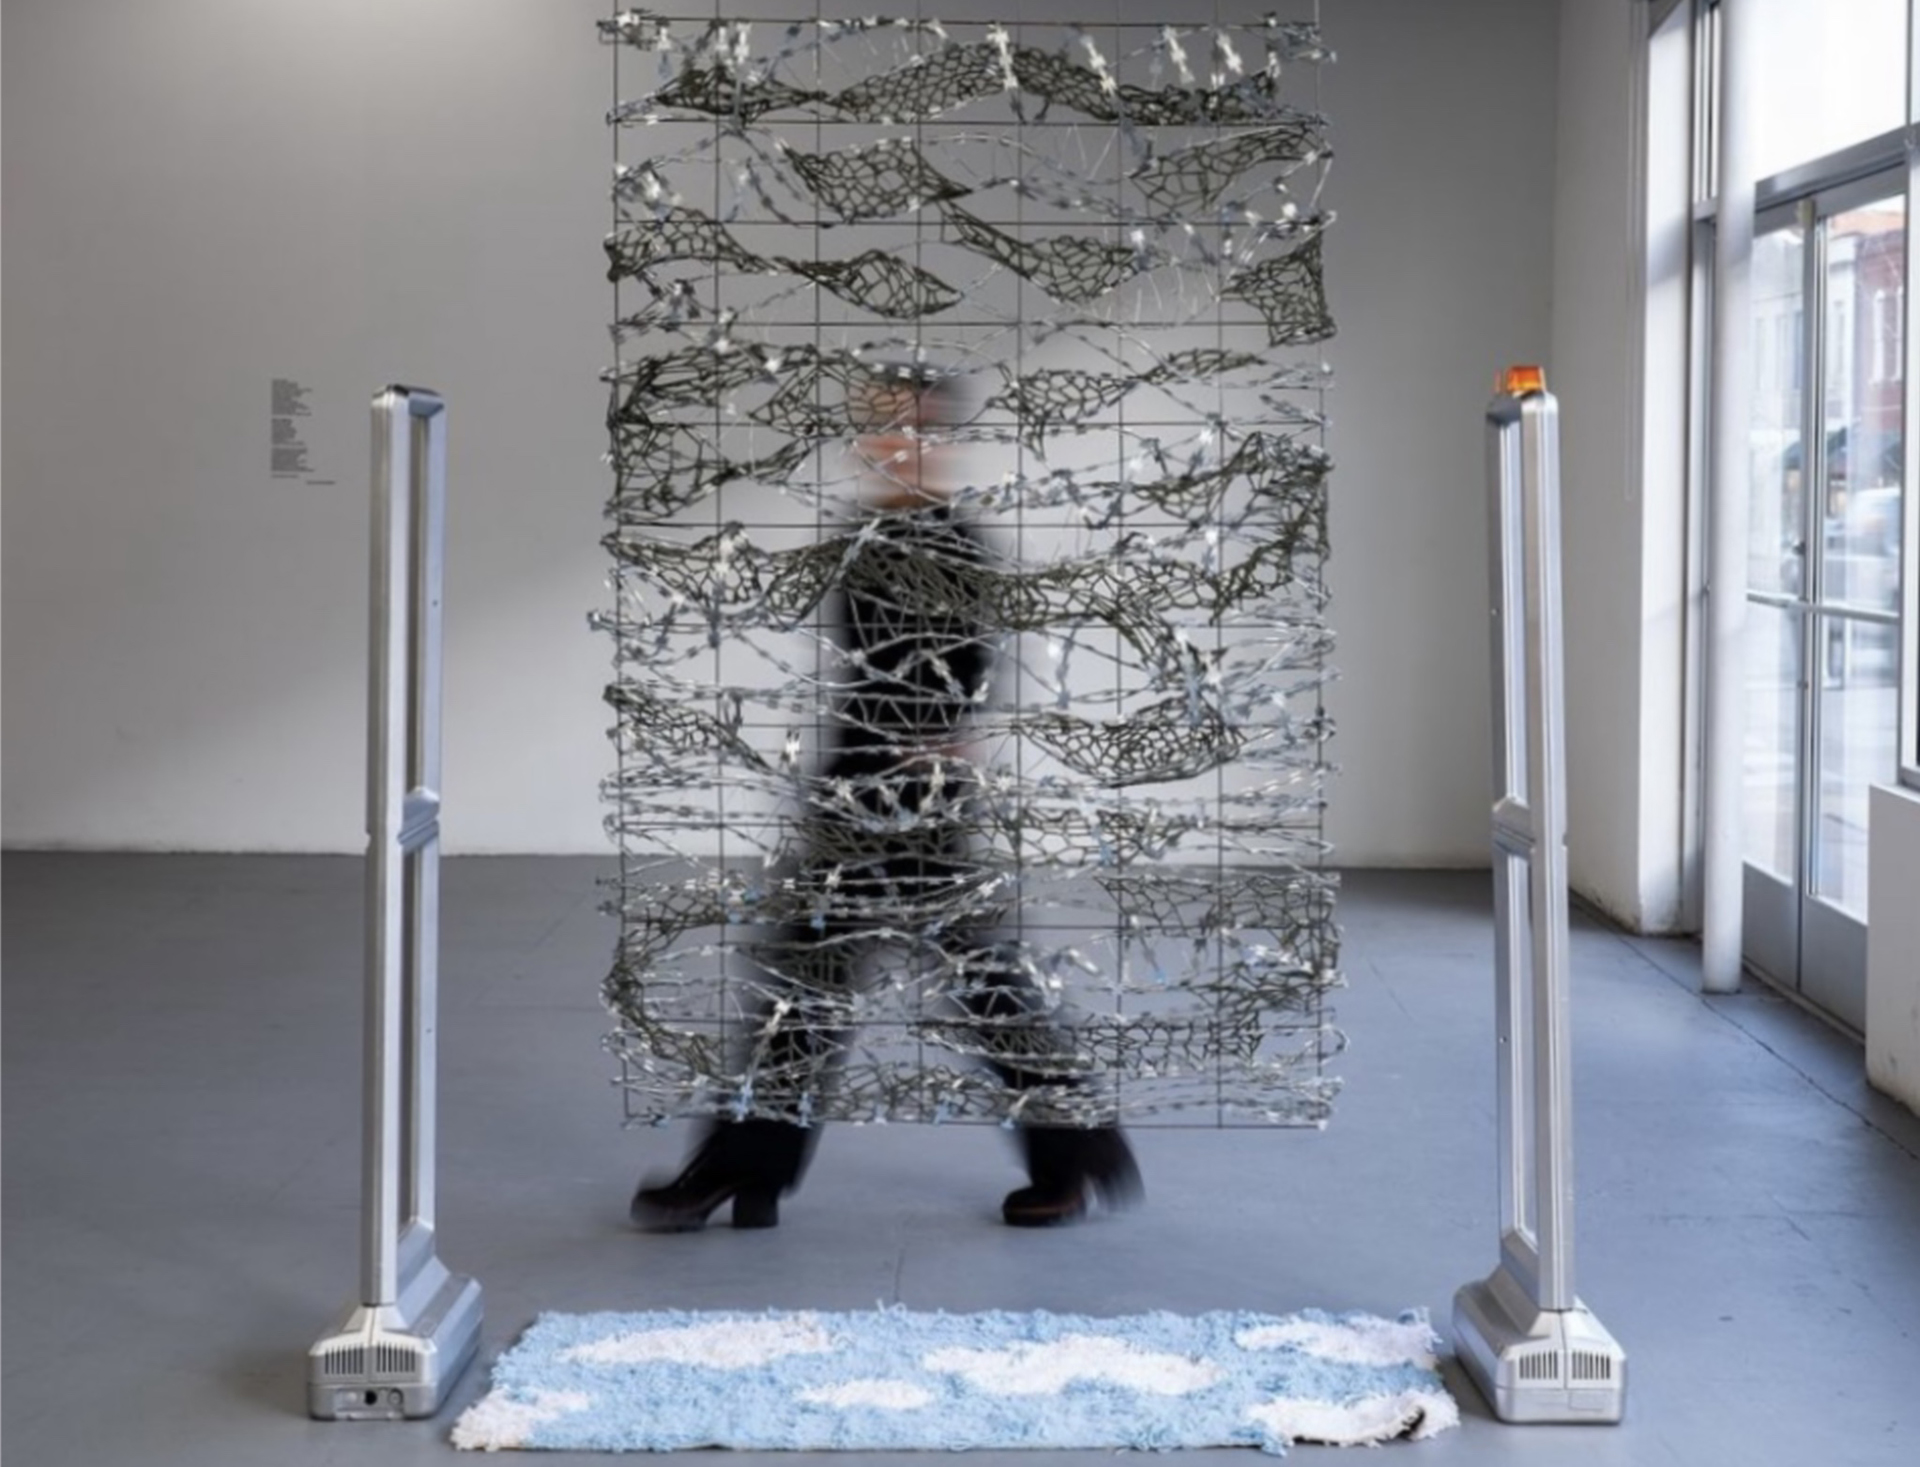 The Silver Lining We Don't Need, Razor Wire, Steel, Aluminum, Mixed Fiber, Tufted Acrylic, Metal Detectors, 2020